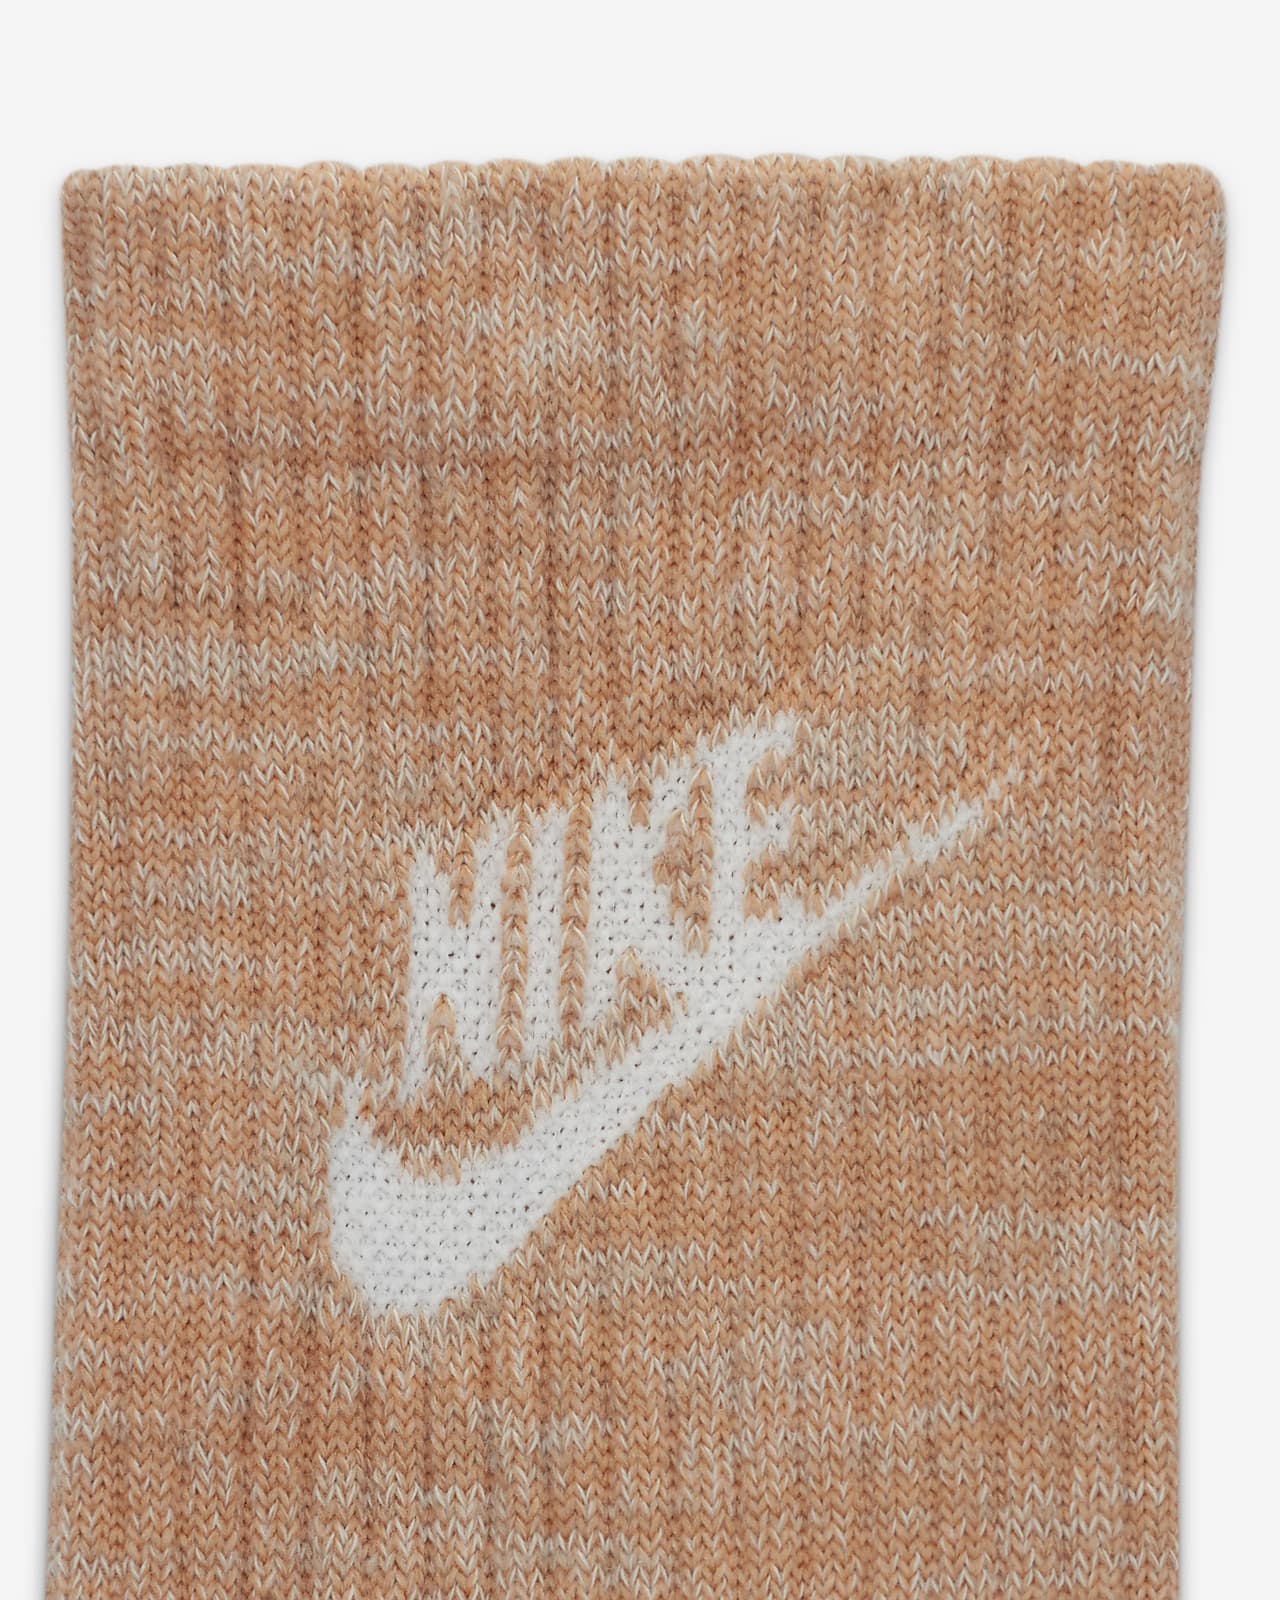 NIKE CHAUSSETTES X3 EVERYDAY PLUS BEIGE - CHAUSSETTE HOMME